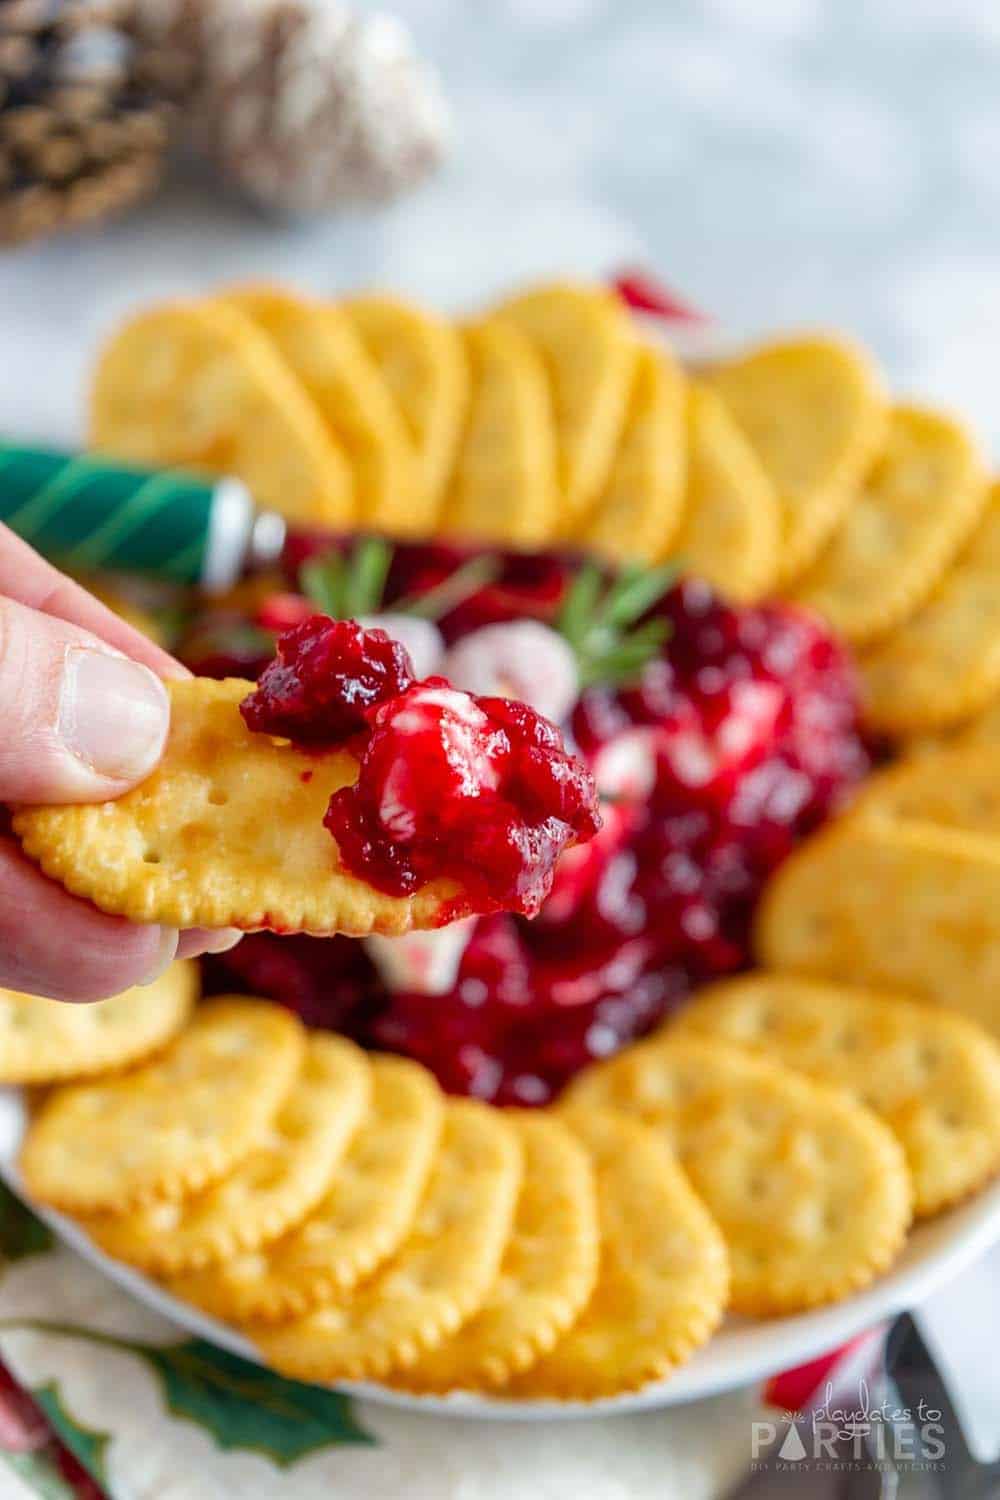 Bite shot of a cracker loaded with cream cheese and cranberry sauce.